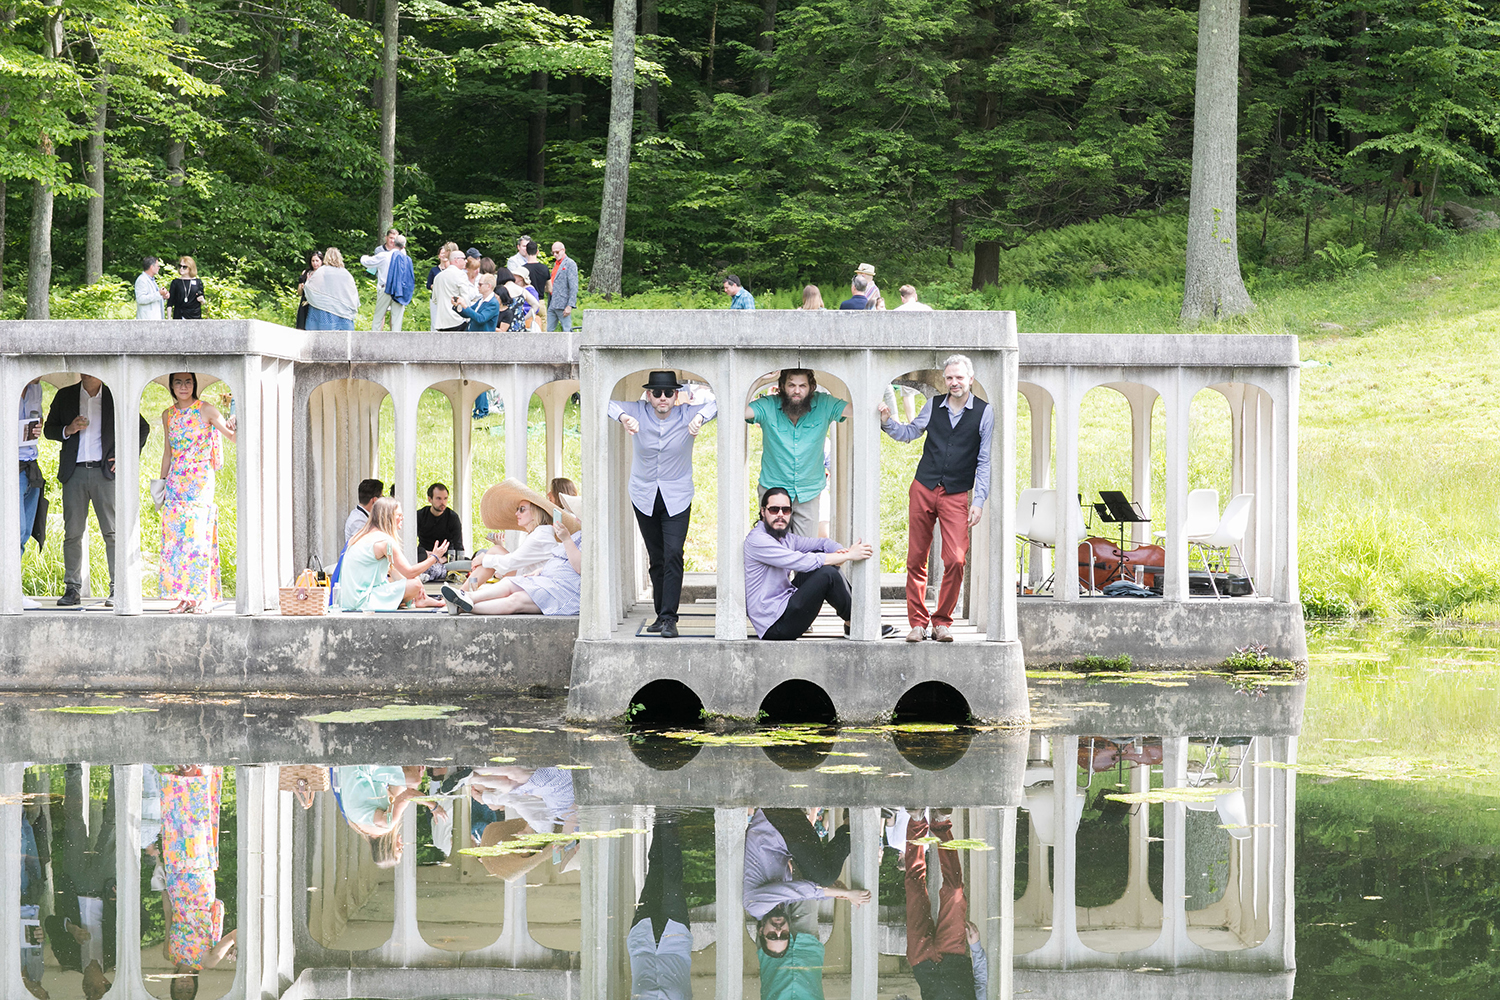 Photo of people hanging out in a pavilion on the grounds of the Glass House